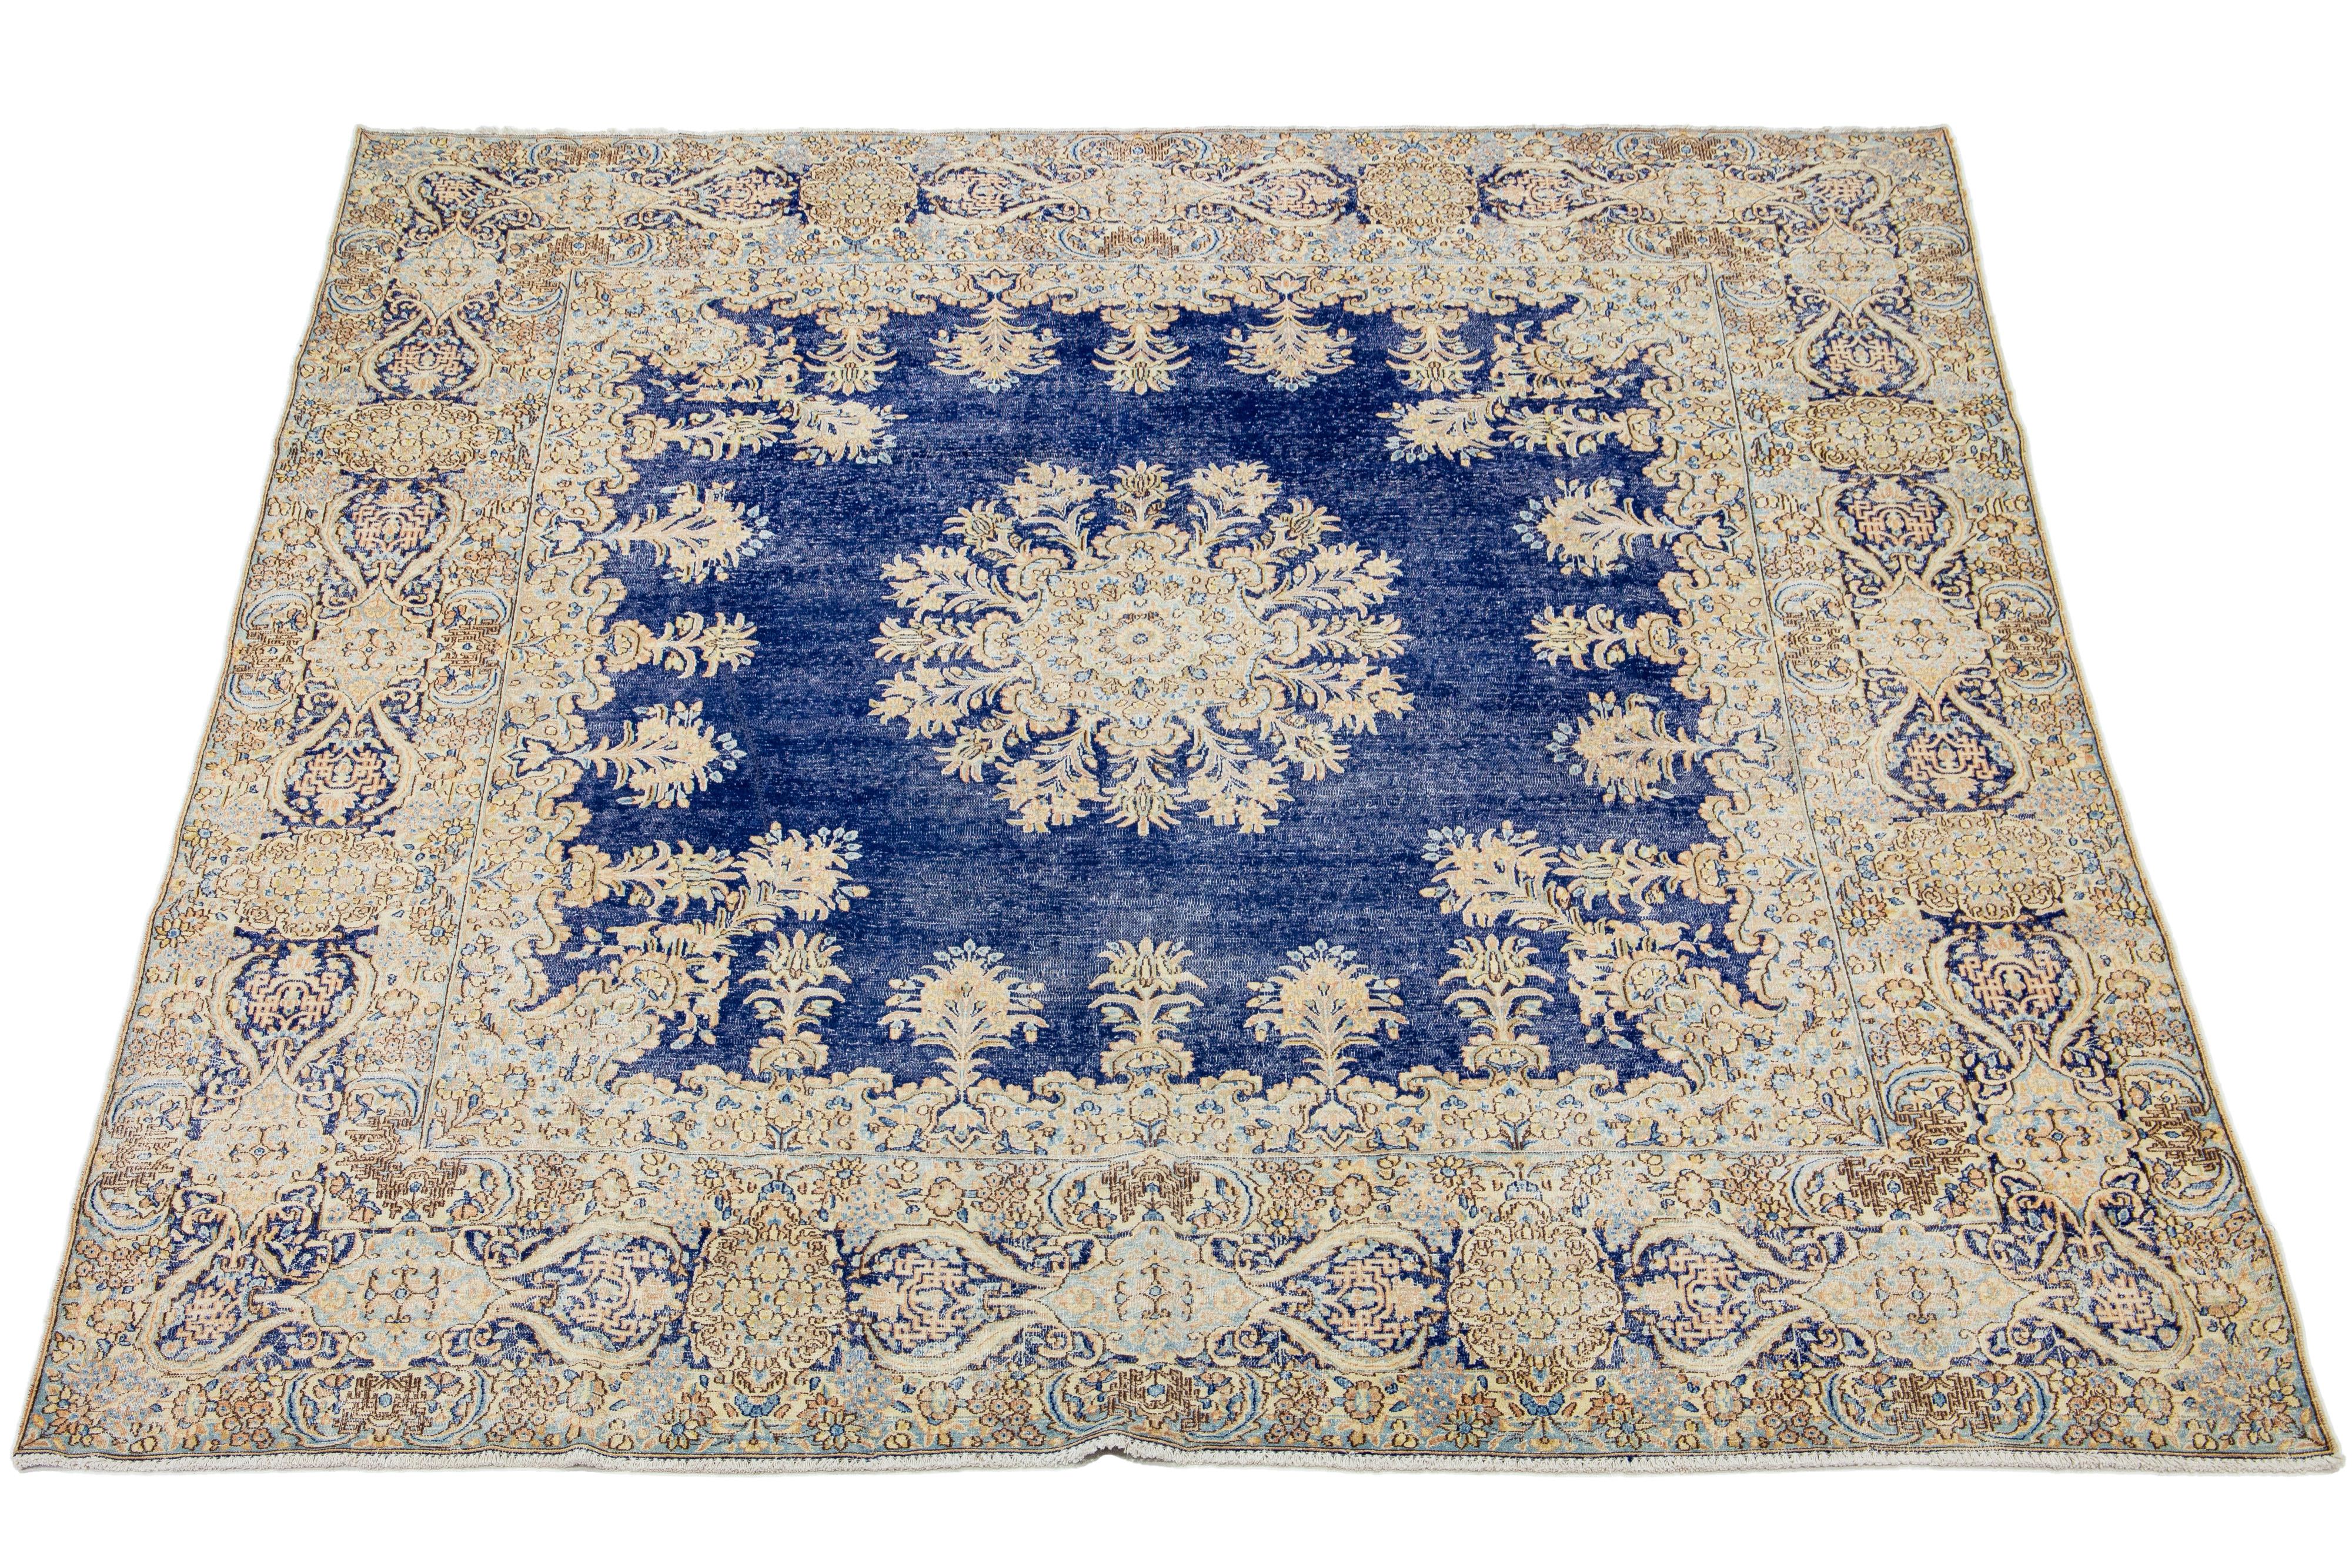 This Persian Kerman wool rug from the late 19th century showcases a meticulously crafted all-over floral design in beige, yellow, and peach. It also features a blue field.

This rug measures 9'9